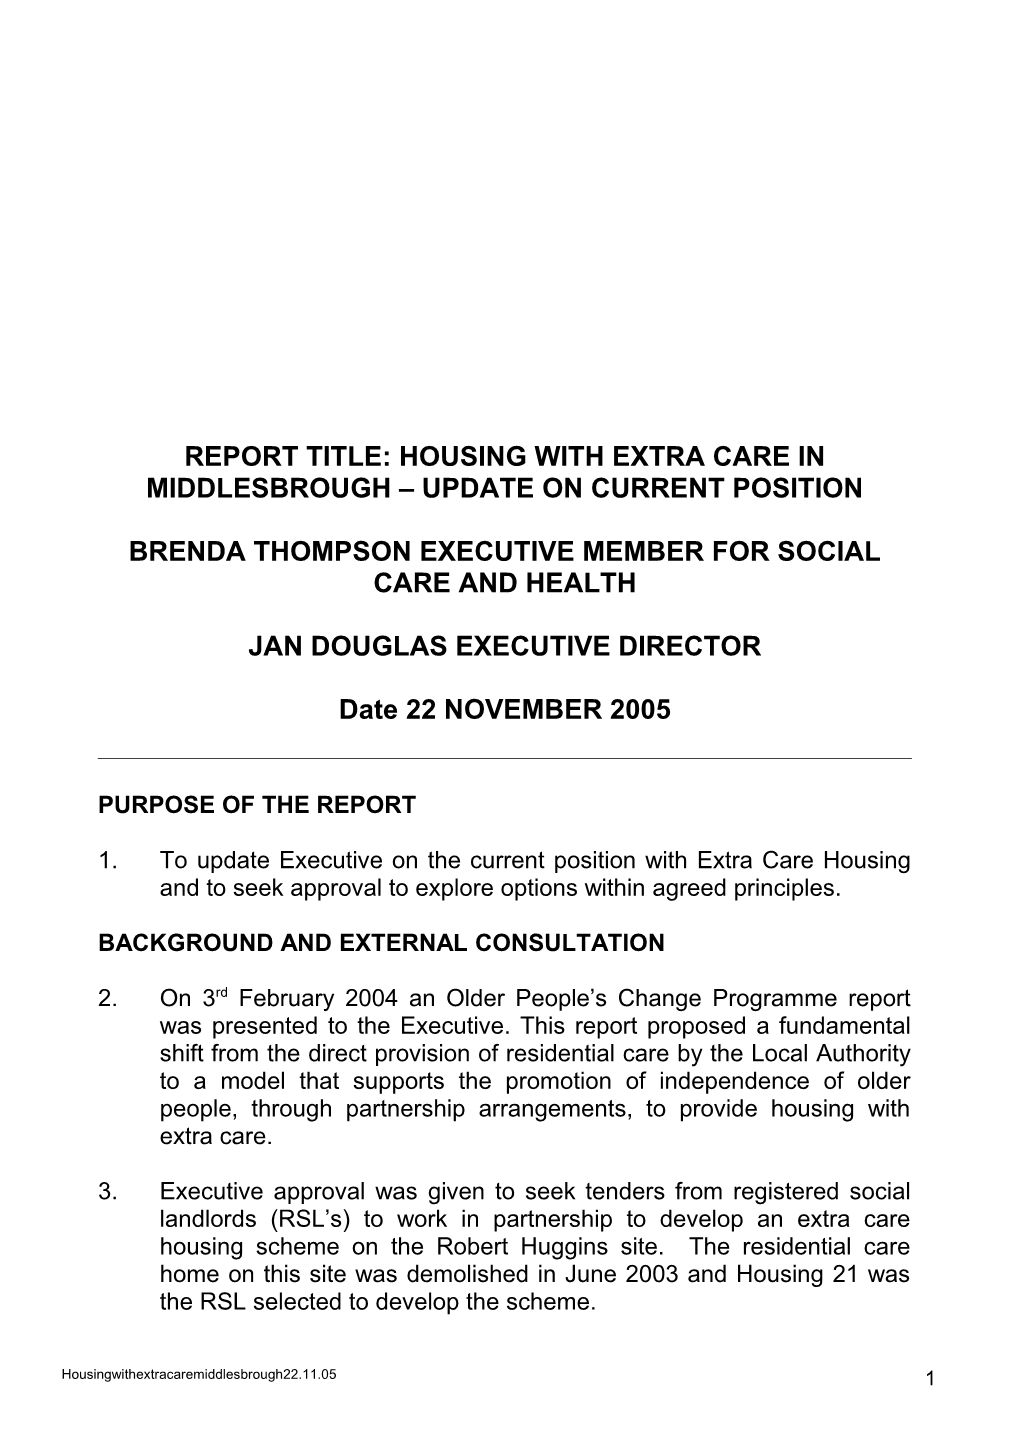 Report Title: Housing with Extra Care in Middlesbrough Update on Current Position